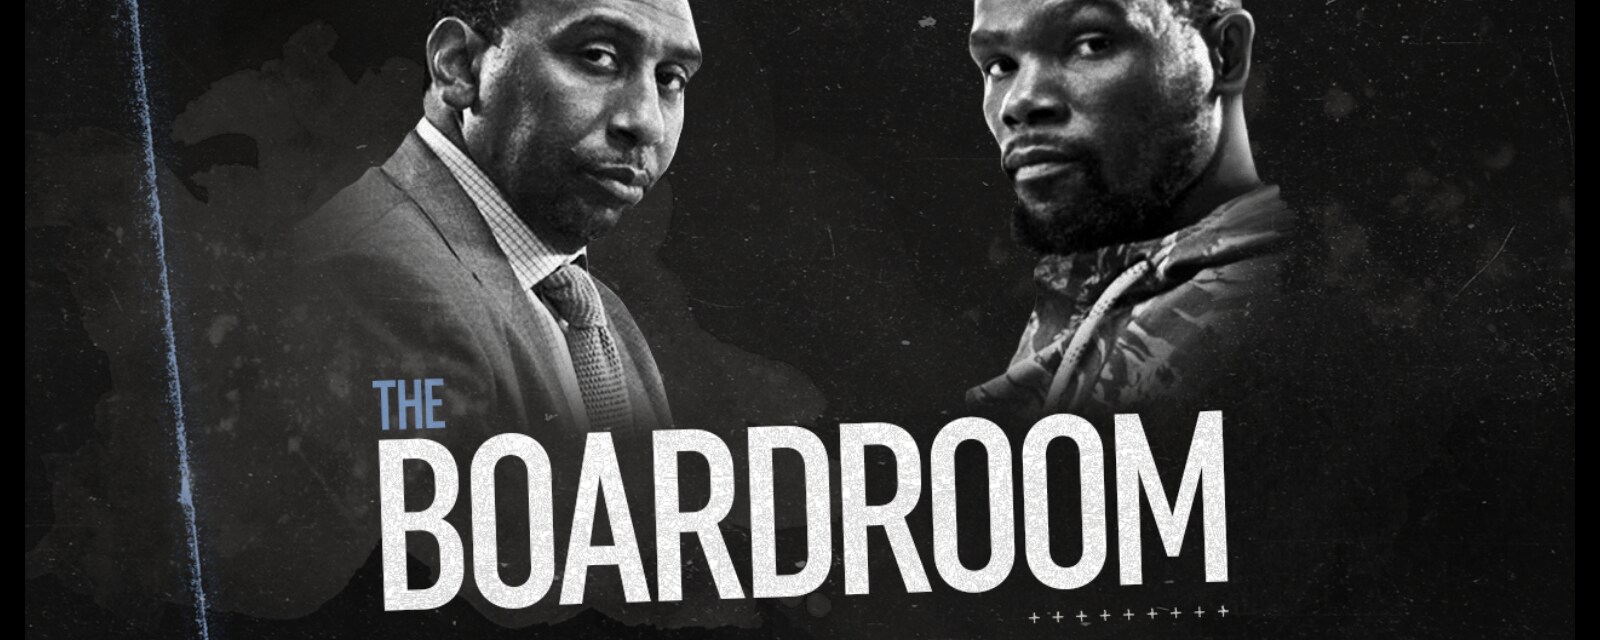 ESPN+ Exclusive: The Boardroom Returns with Special “Free Agency Frenzy” Episode Featuring Kevin Durant and Stephen A. Smith